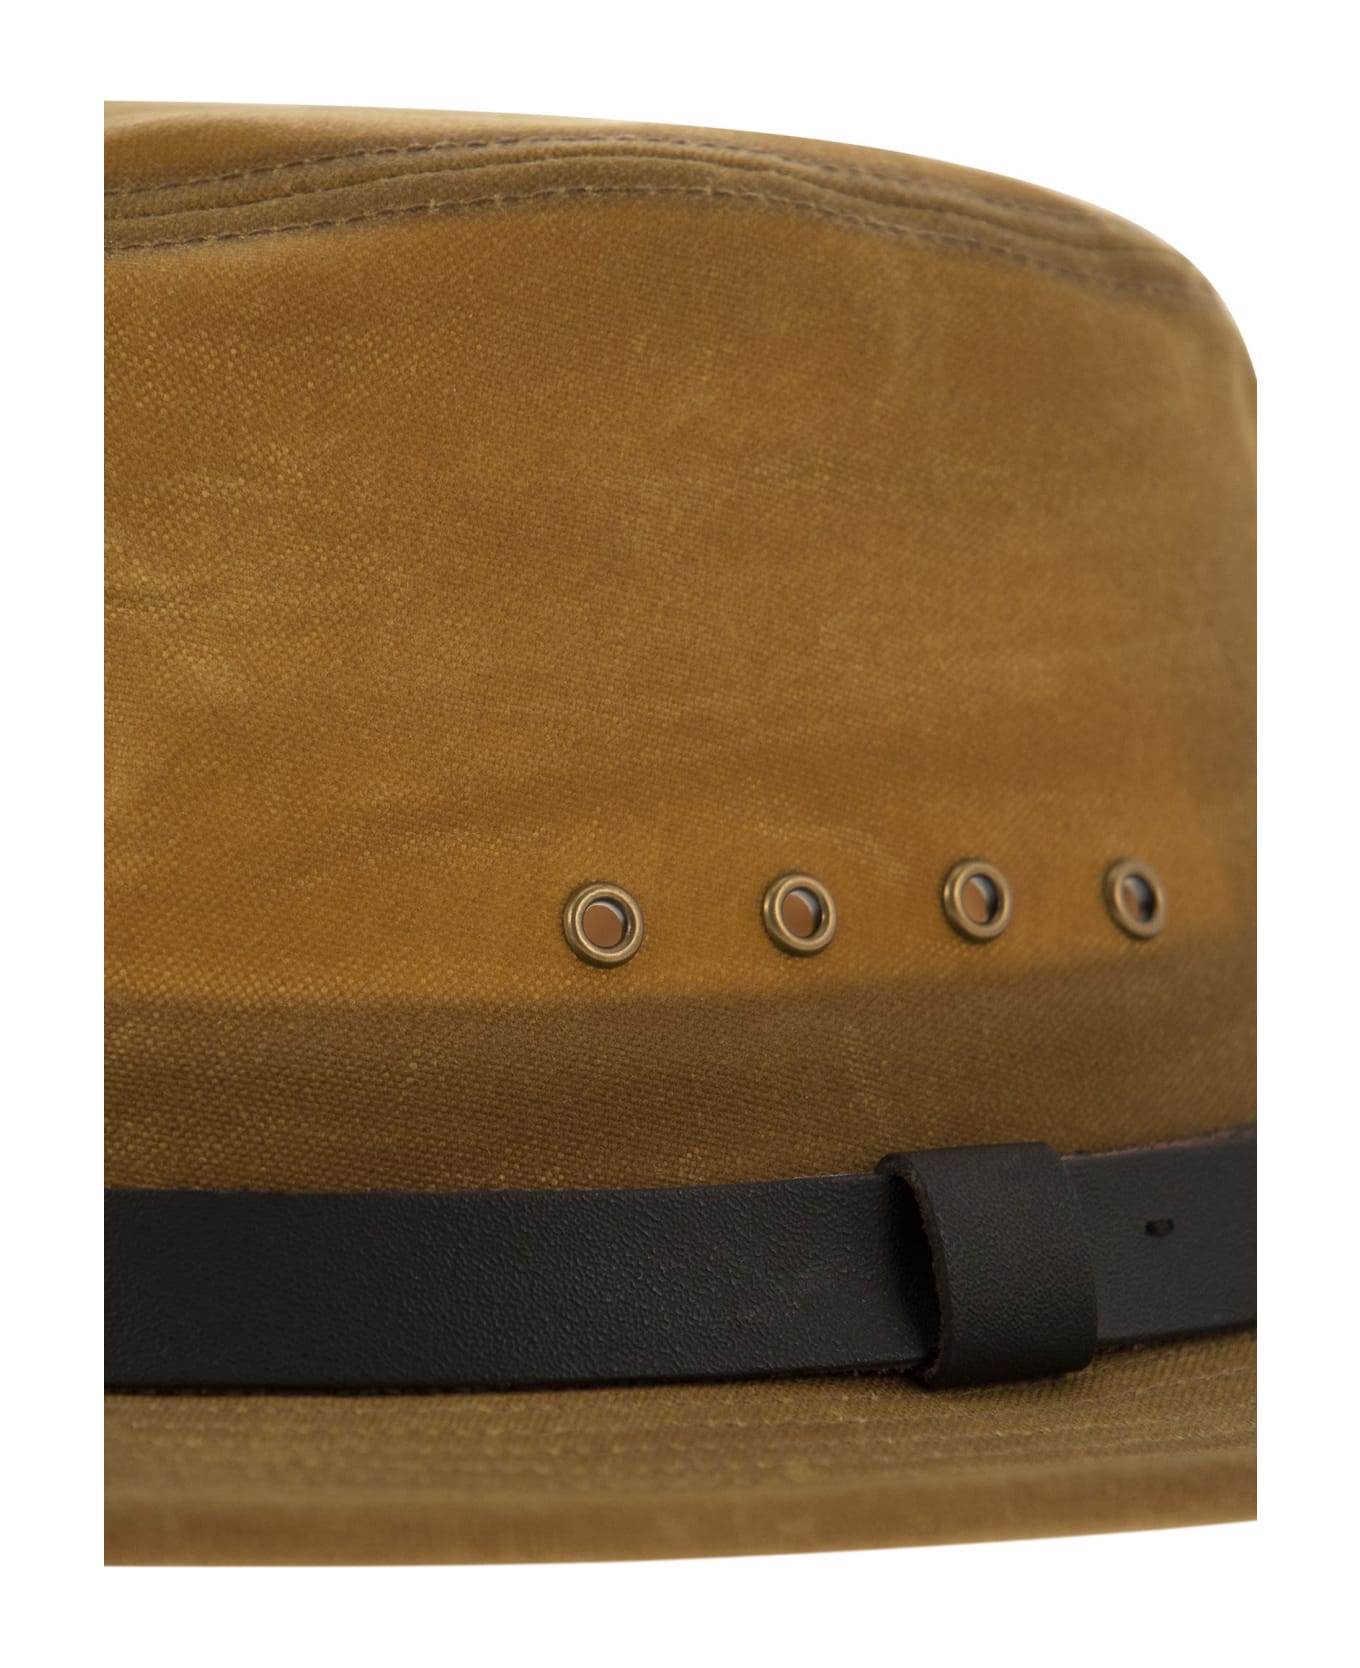 Filson Classic Full-brimmed Hat - Brown